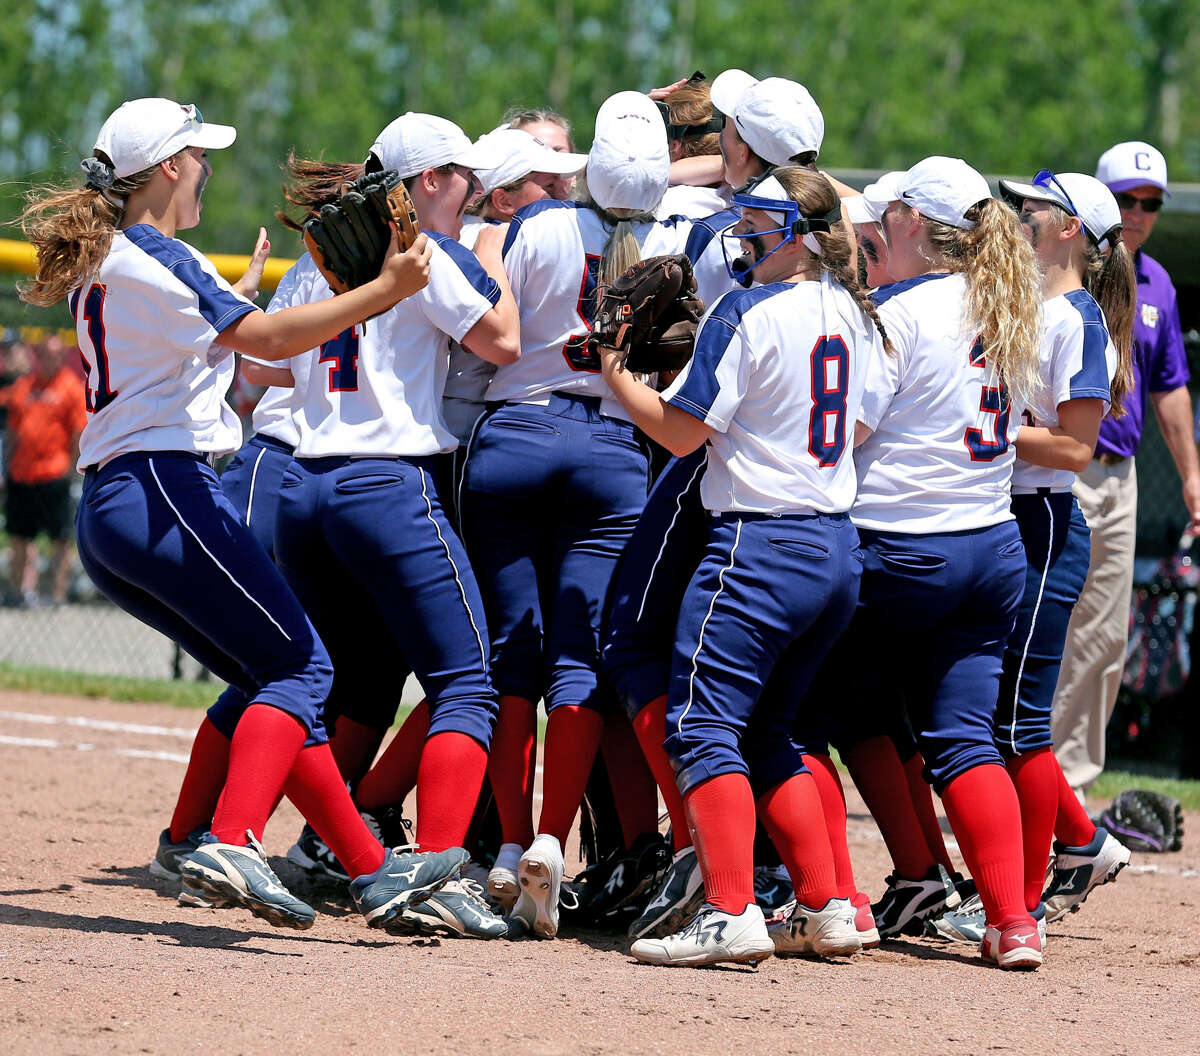 The USA softball team celebrates following its 13-0 Division 4 quarterfinal victory over Allen Park Inter-City Baptist, Tuesday, at Saginaw Valley State University.